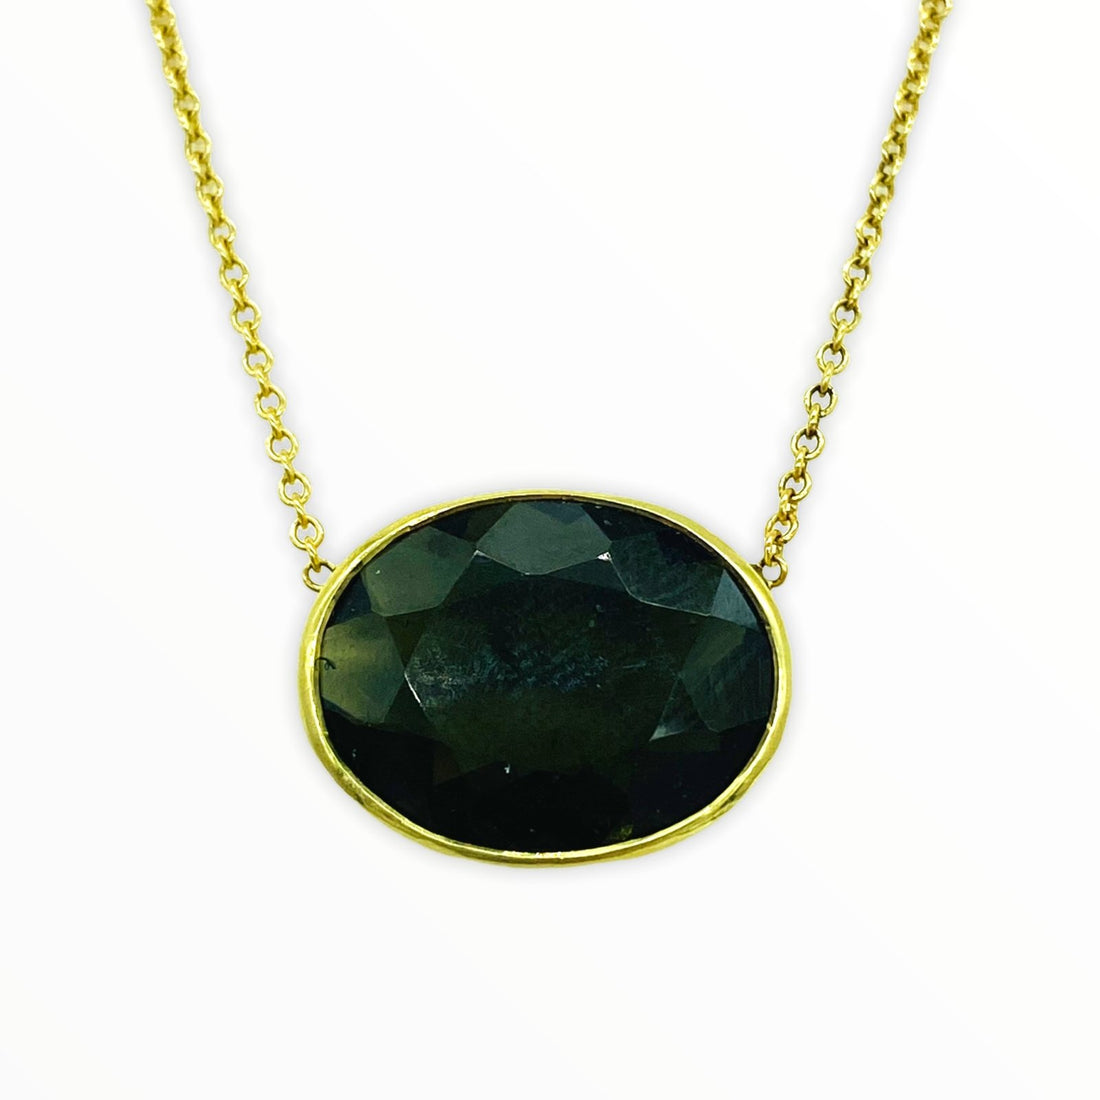 Moldavite Wire Wrap Necklace in 24k Gold – MeadowsCrystals